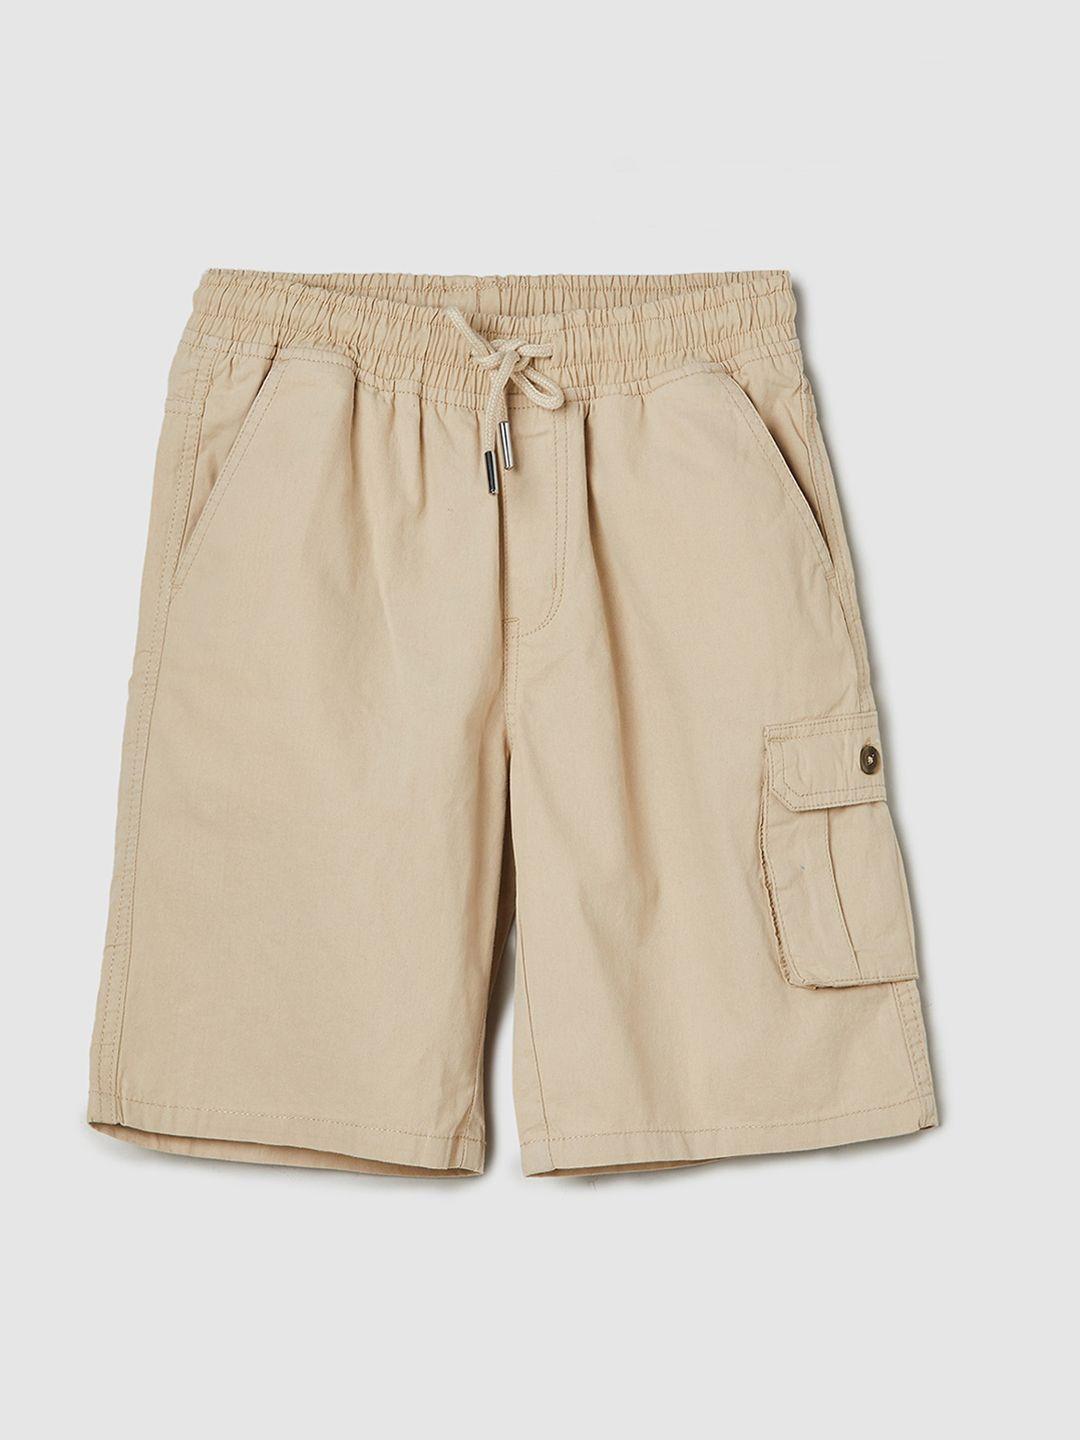 max boys mid-rise casual cotton shorts